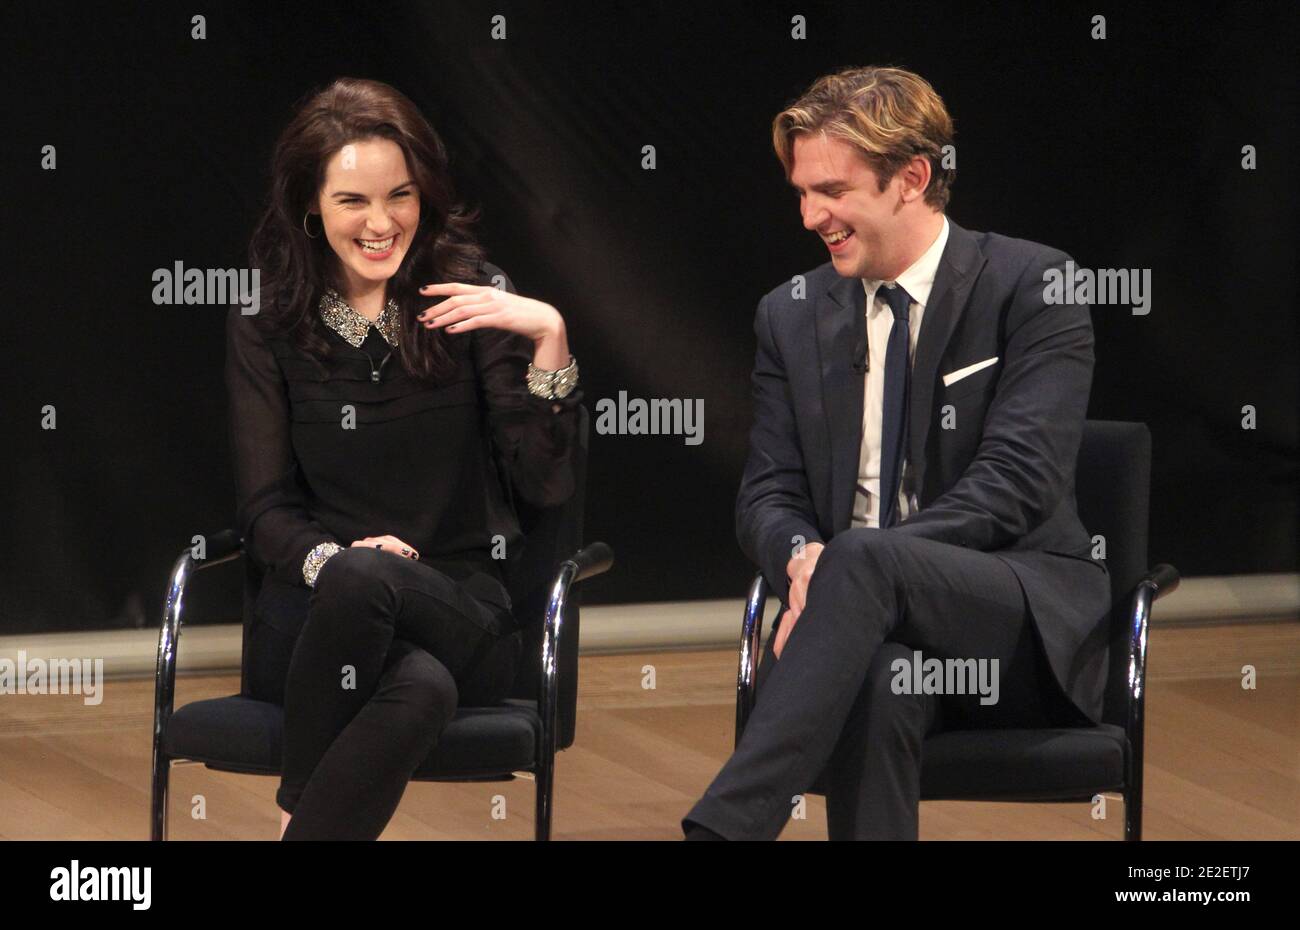 Cast members Michelle Dockery and Dan Stevens attend special screening of season two of the award winning drama tv series 'Downton Abbey' at Times Center in New York City, NY, USA on December 15, 2011. Downton Abbey has bagged four nominations for Golden Globe awards. Photo by Charles Guerin/ABACAPRESS.COM Stock Photo